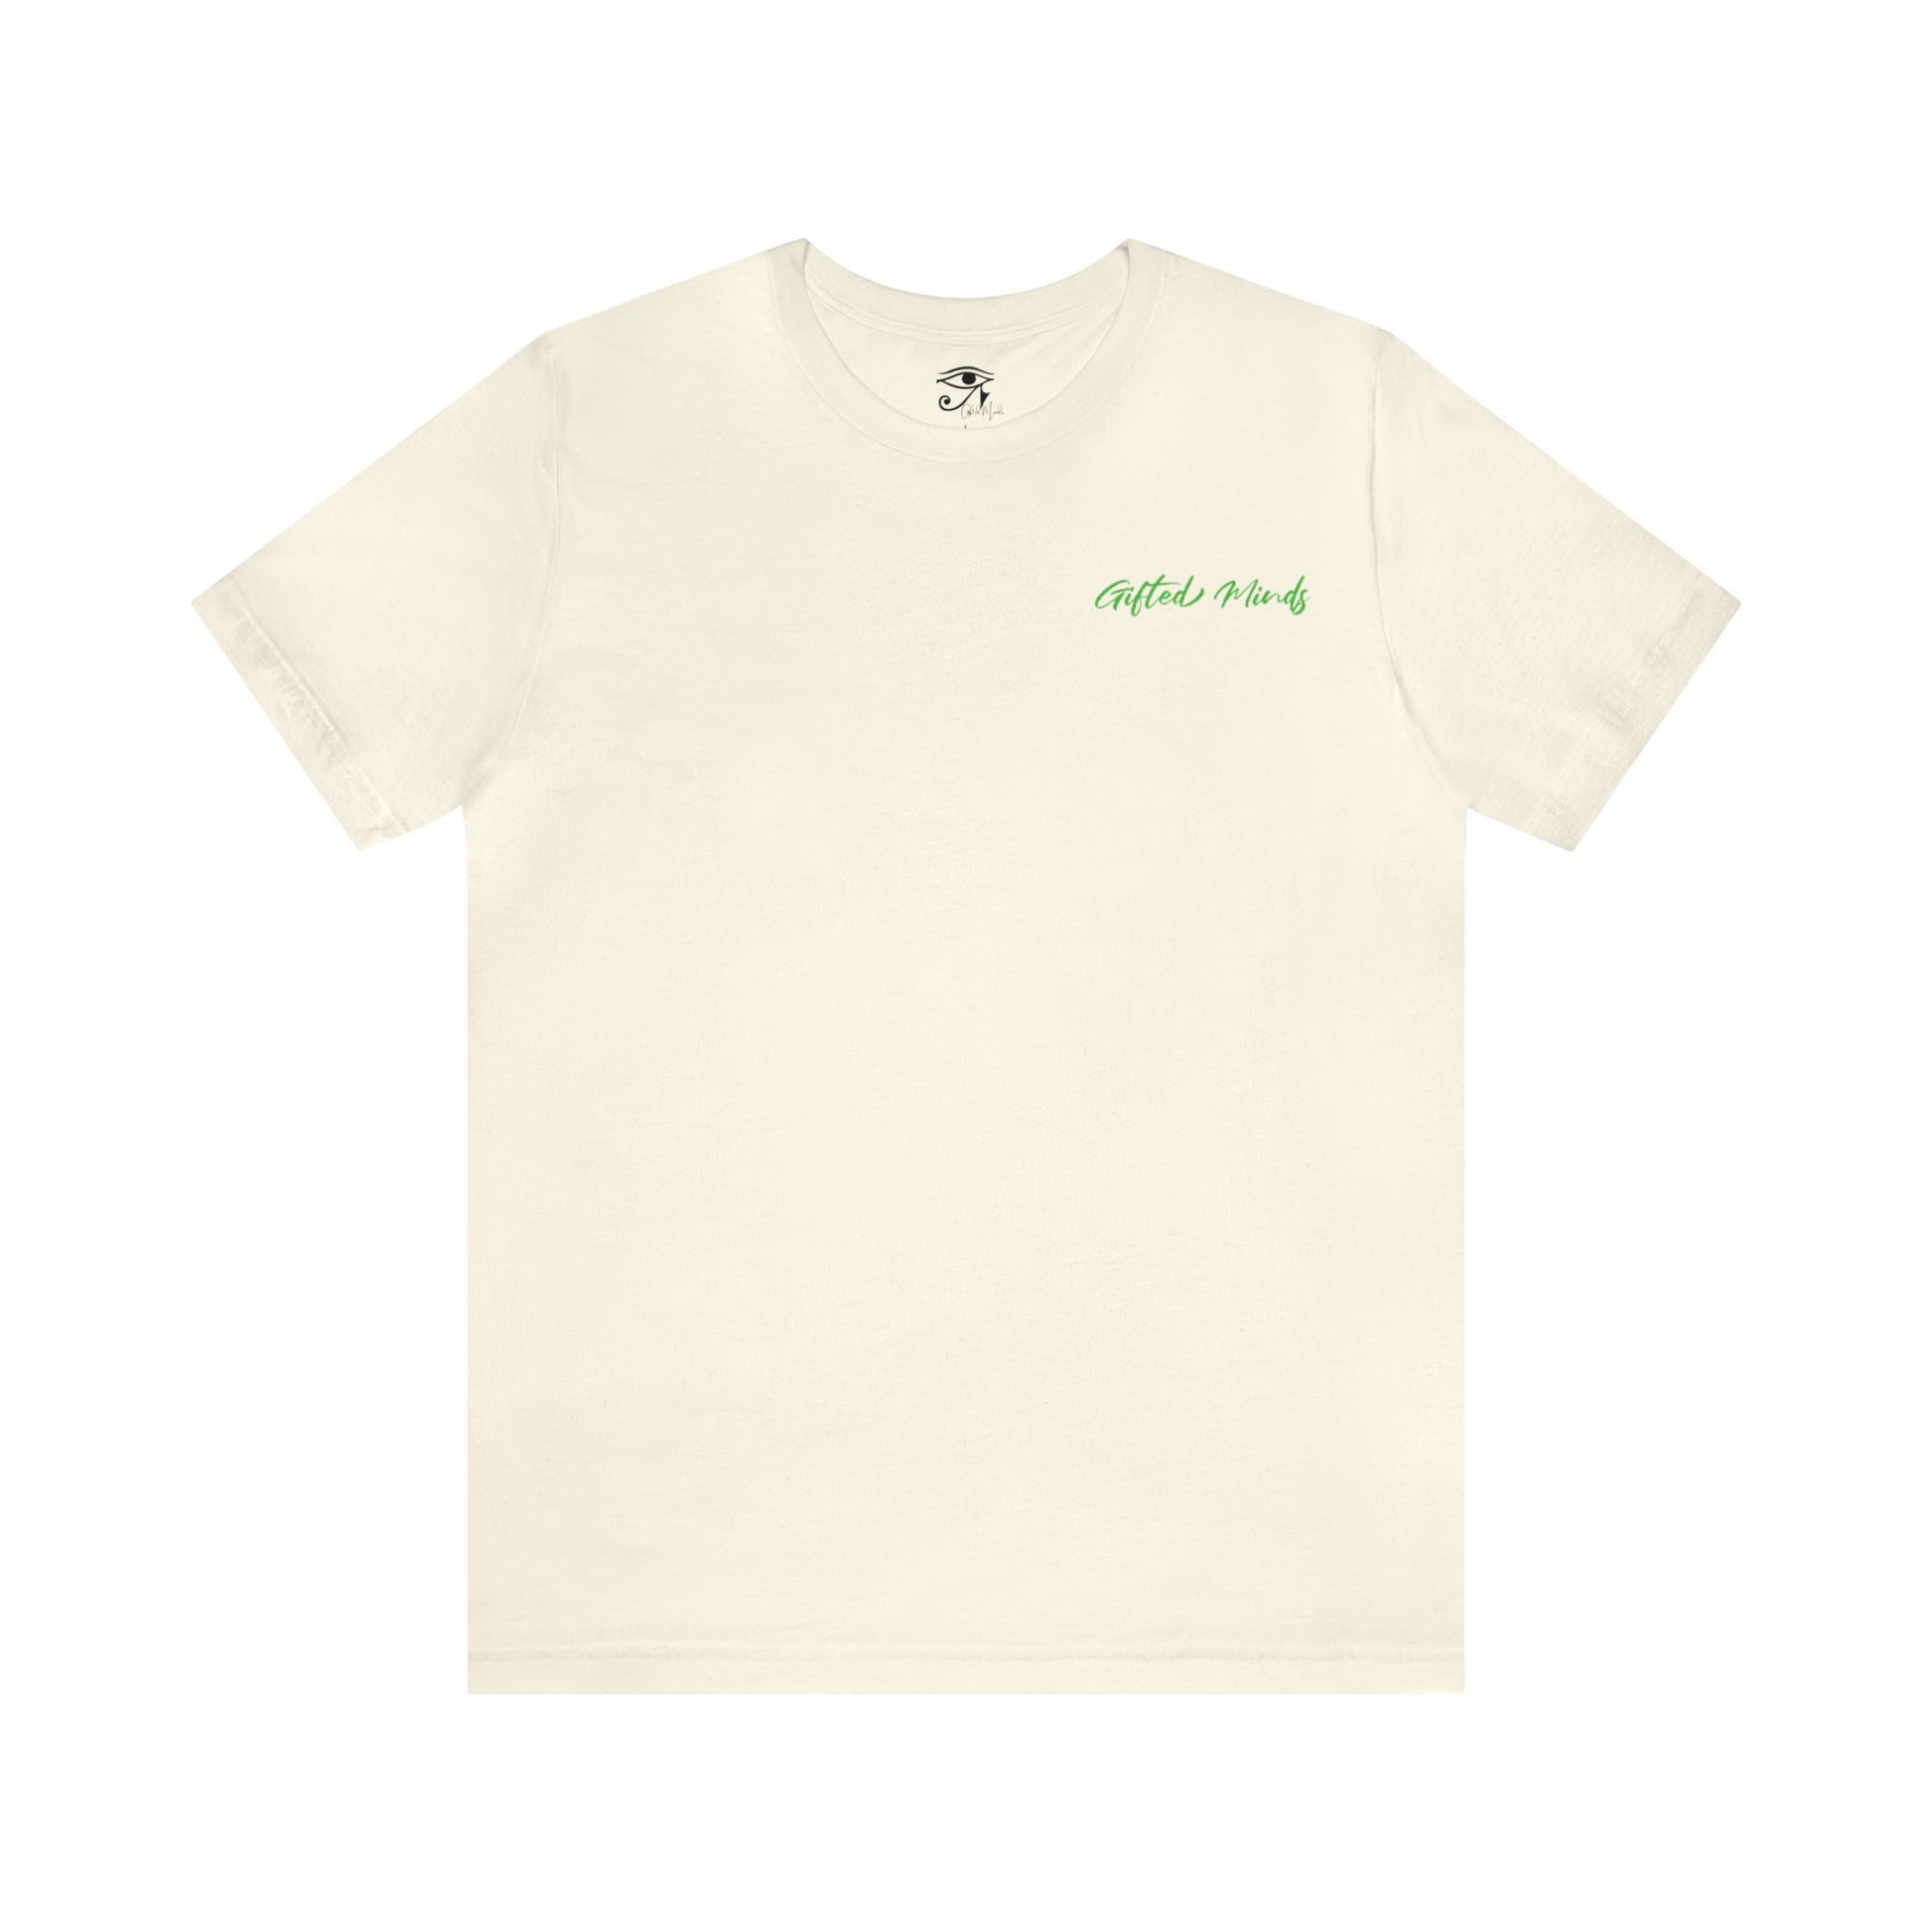 Self-Care and Wisdom Short Sleeve Tee - GFTD MNDS